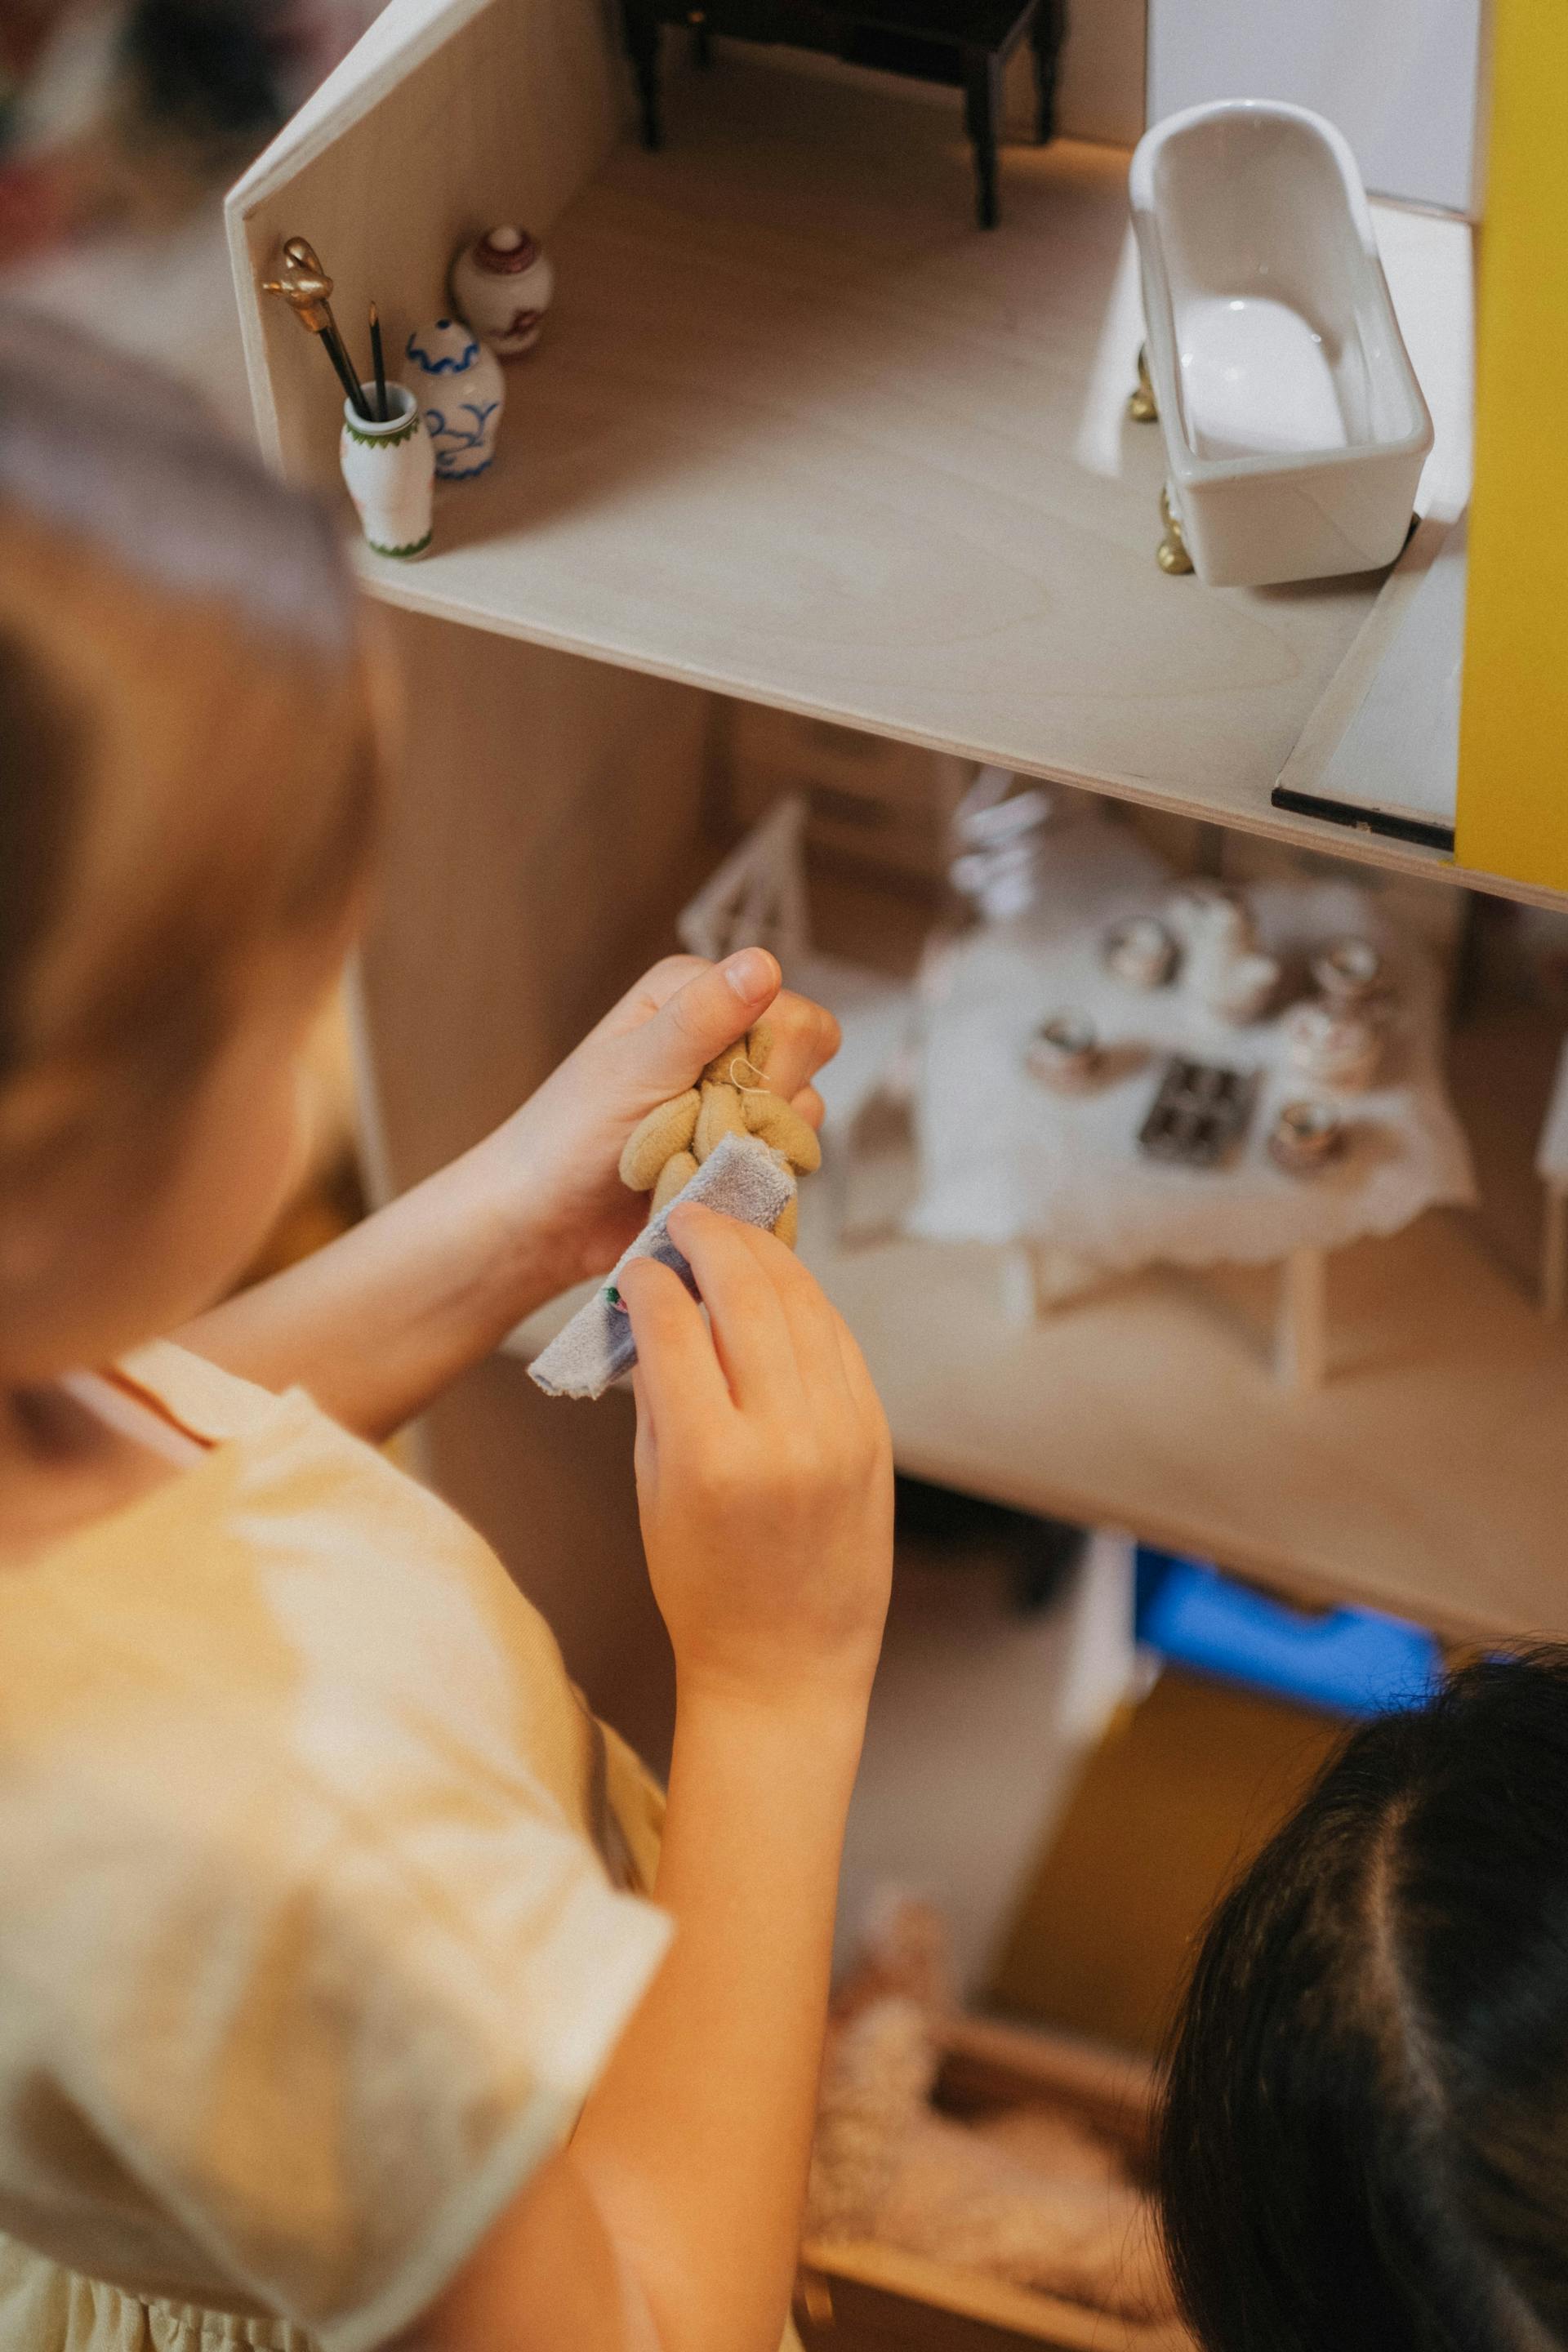 A child playing with a dollhouse | Source: Pexels